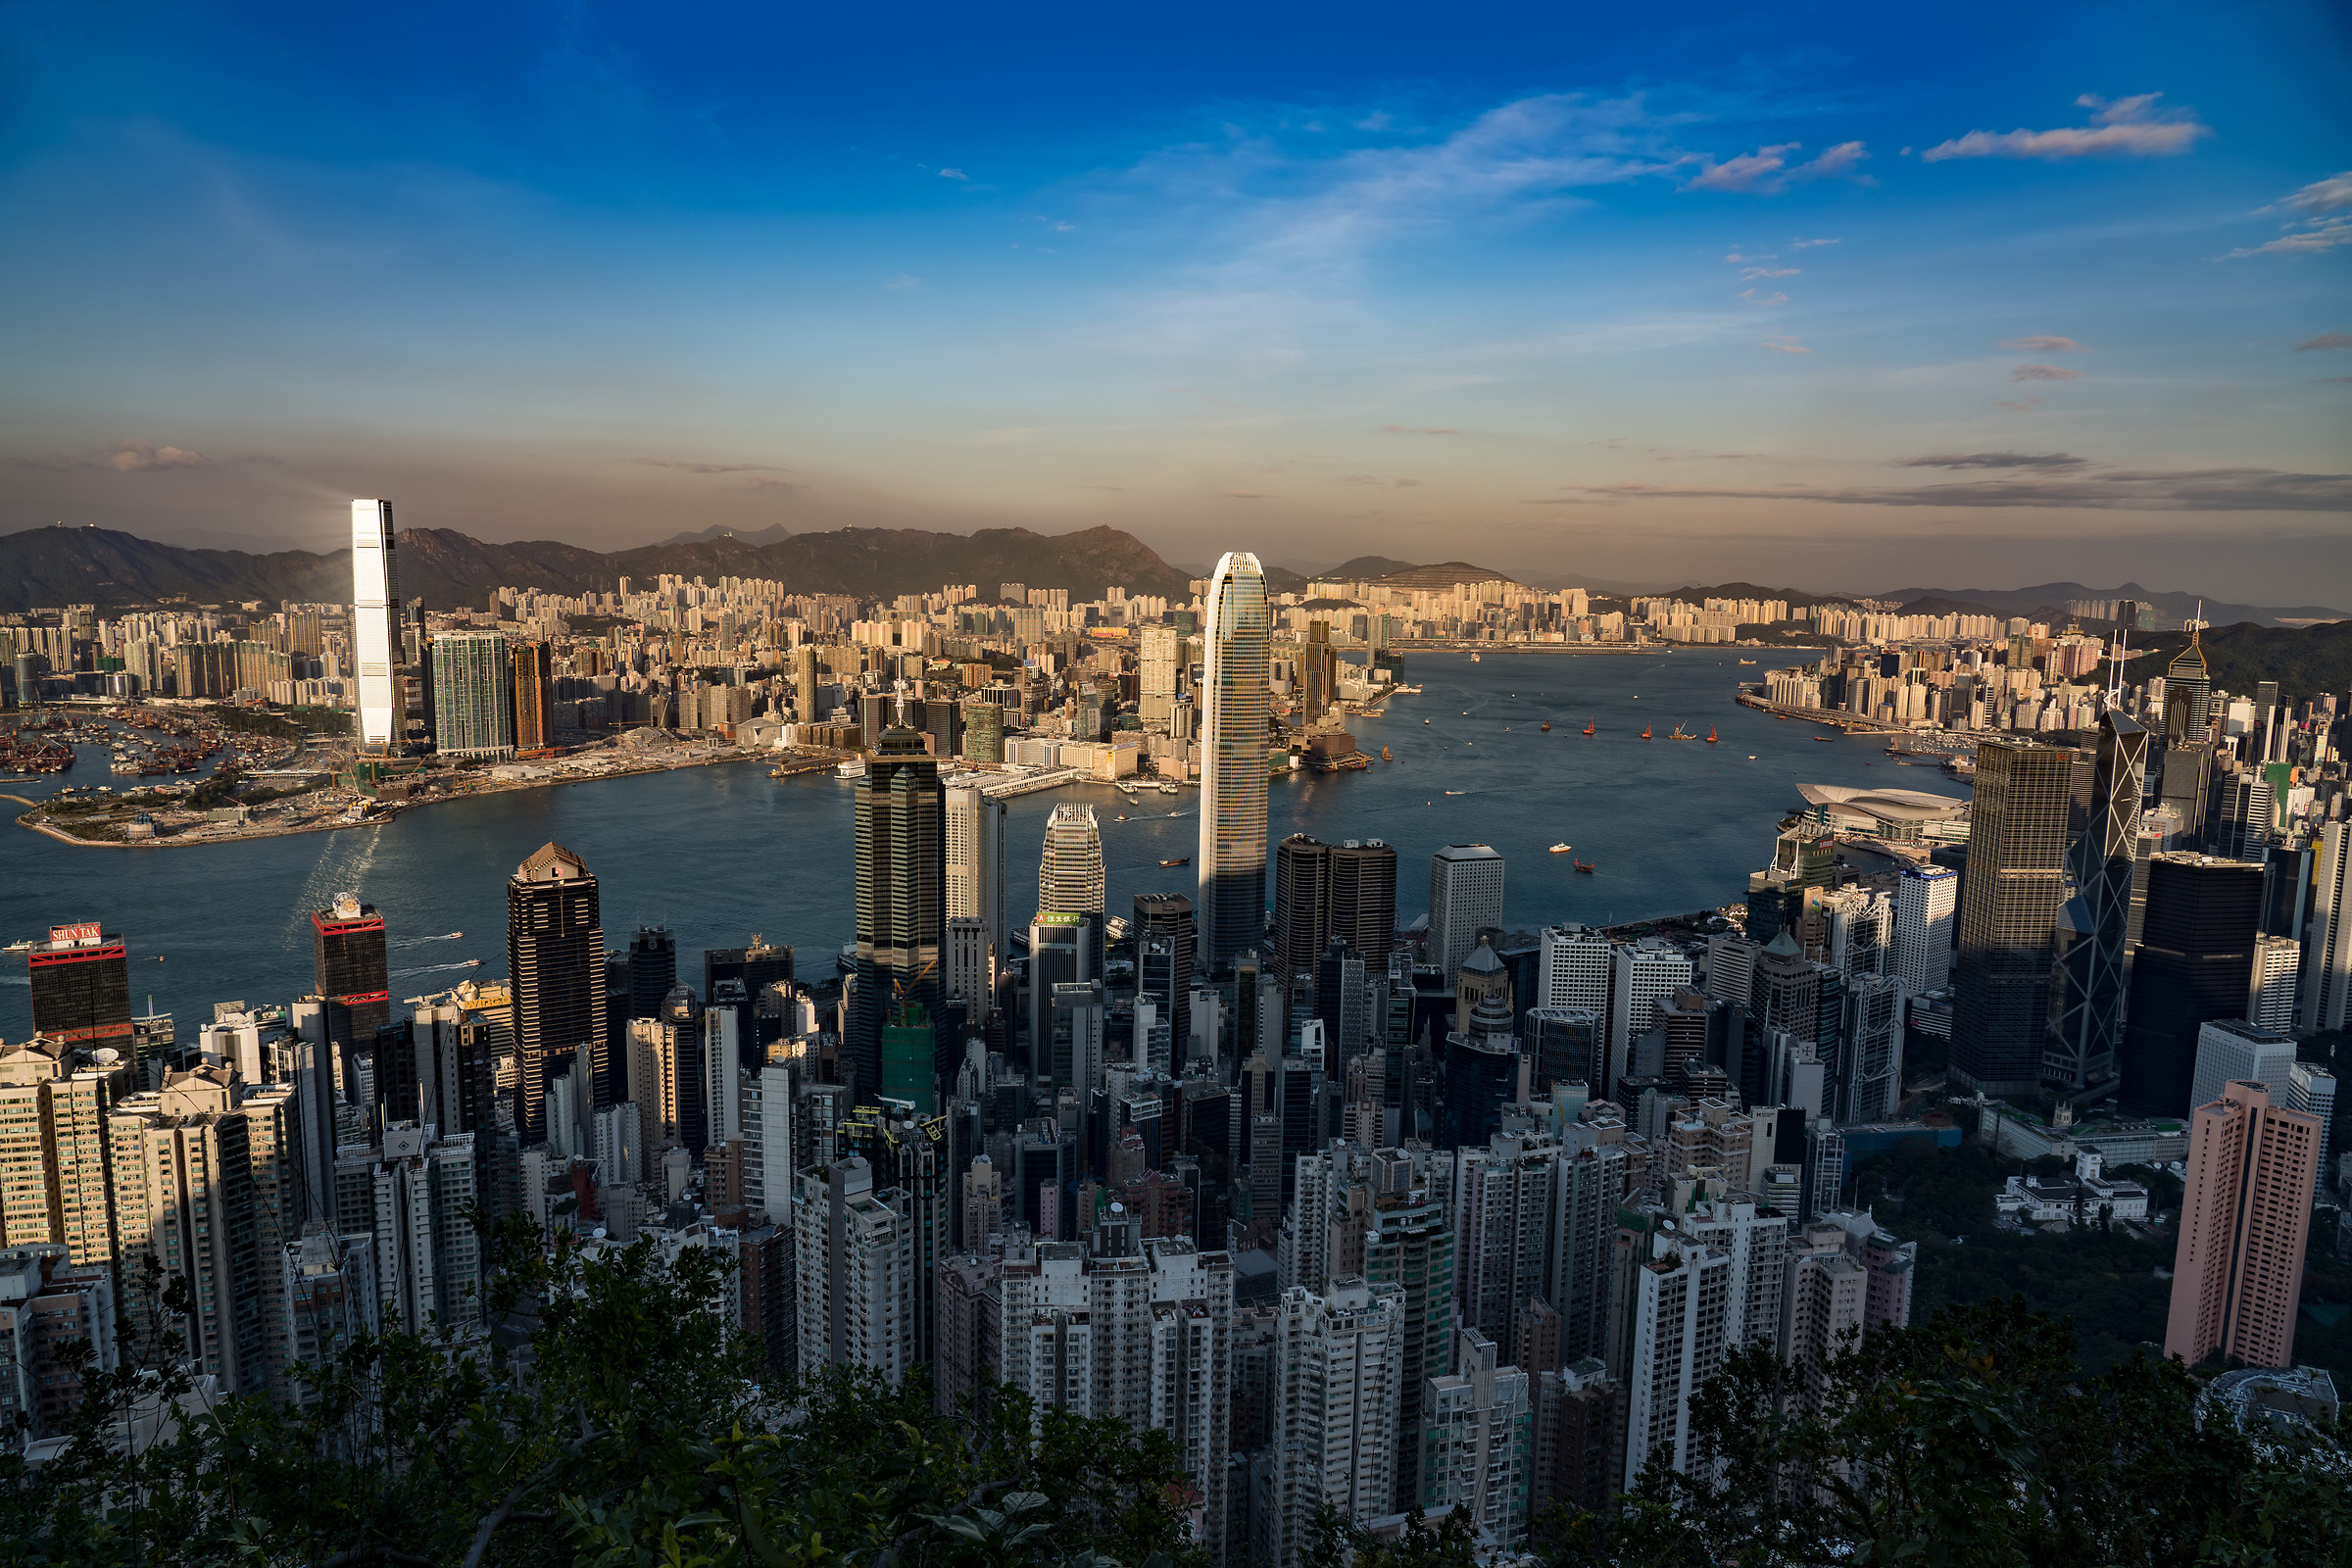 With A7rIII and 24-105 G from Victoria Peak...